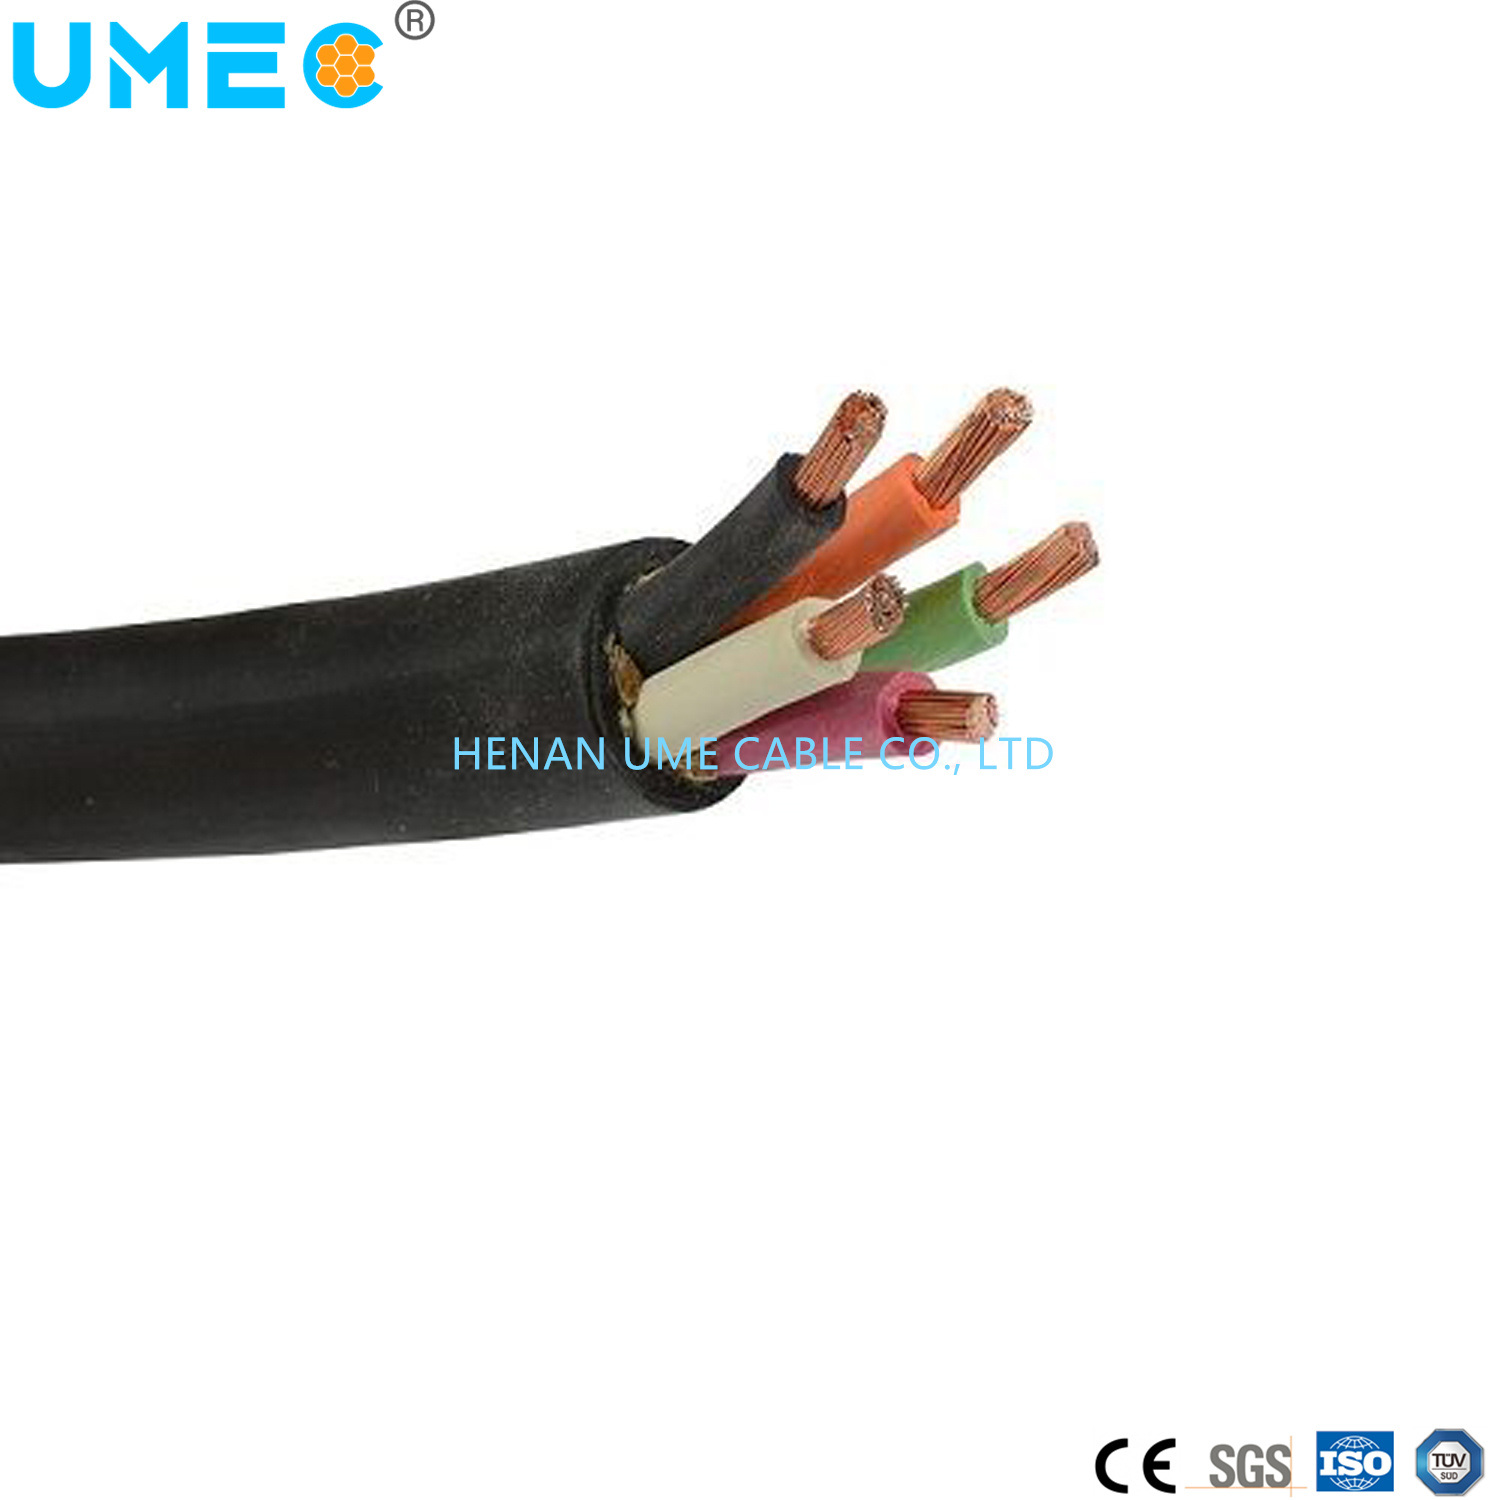 Customized 1mm 2.5mm 4mm 6mm 8mm 10mm 16mm 25mm 50mm 70mm 95mm 2 3 4 5 6 7 Core Electric Battery Cable Rubber Cable Stoow Sjoow Soow Wire Cable